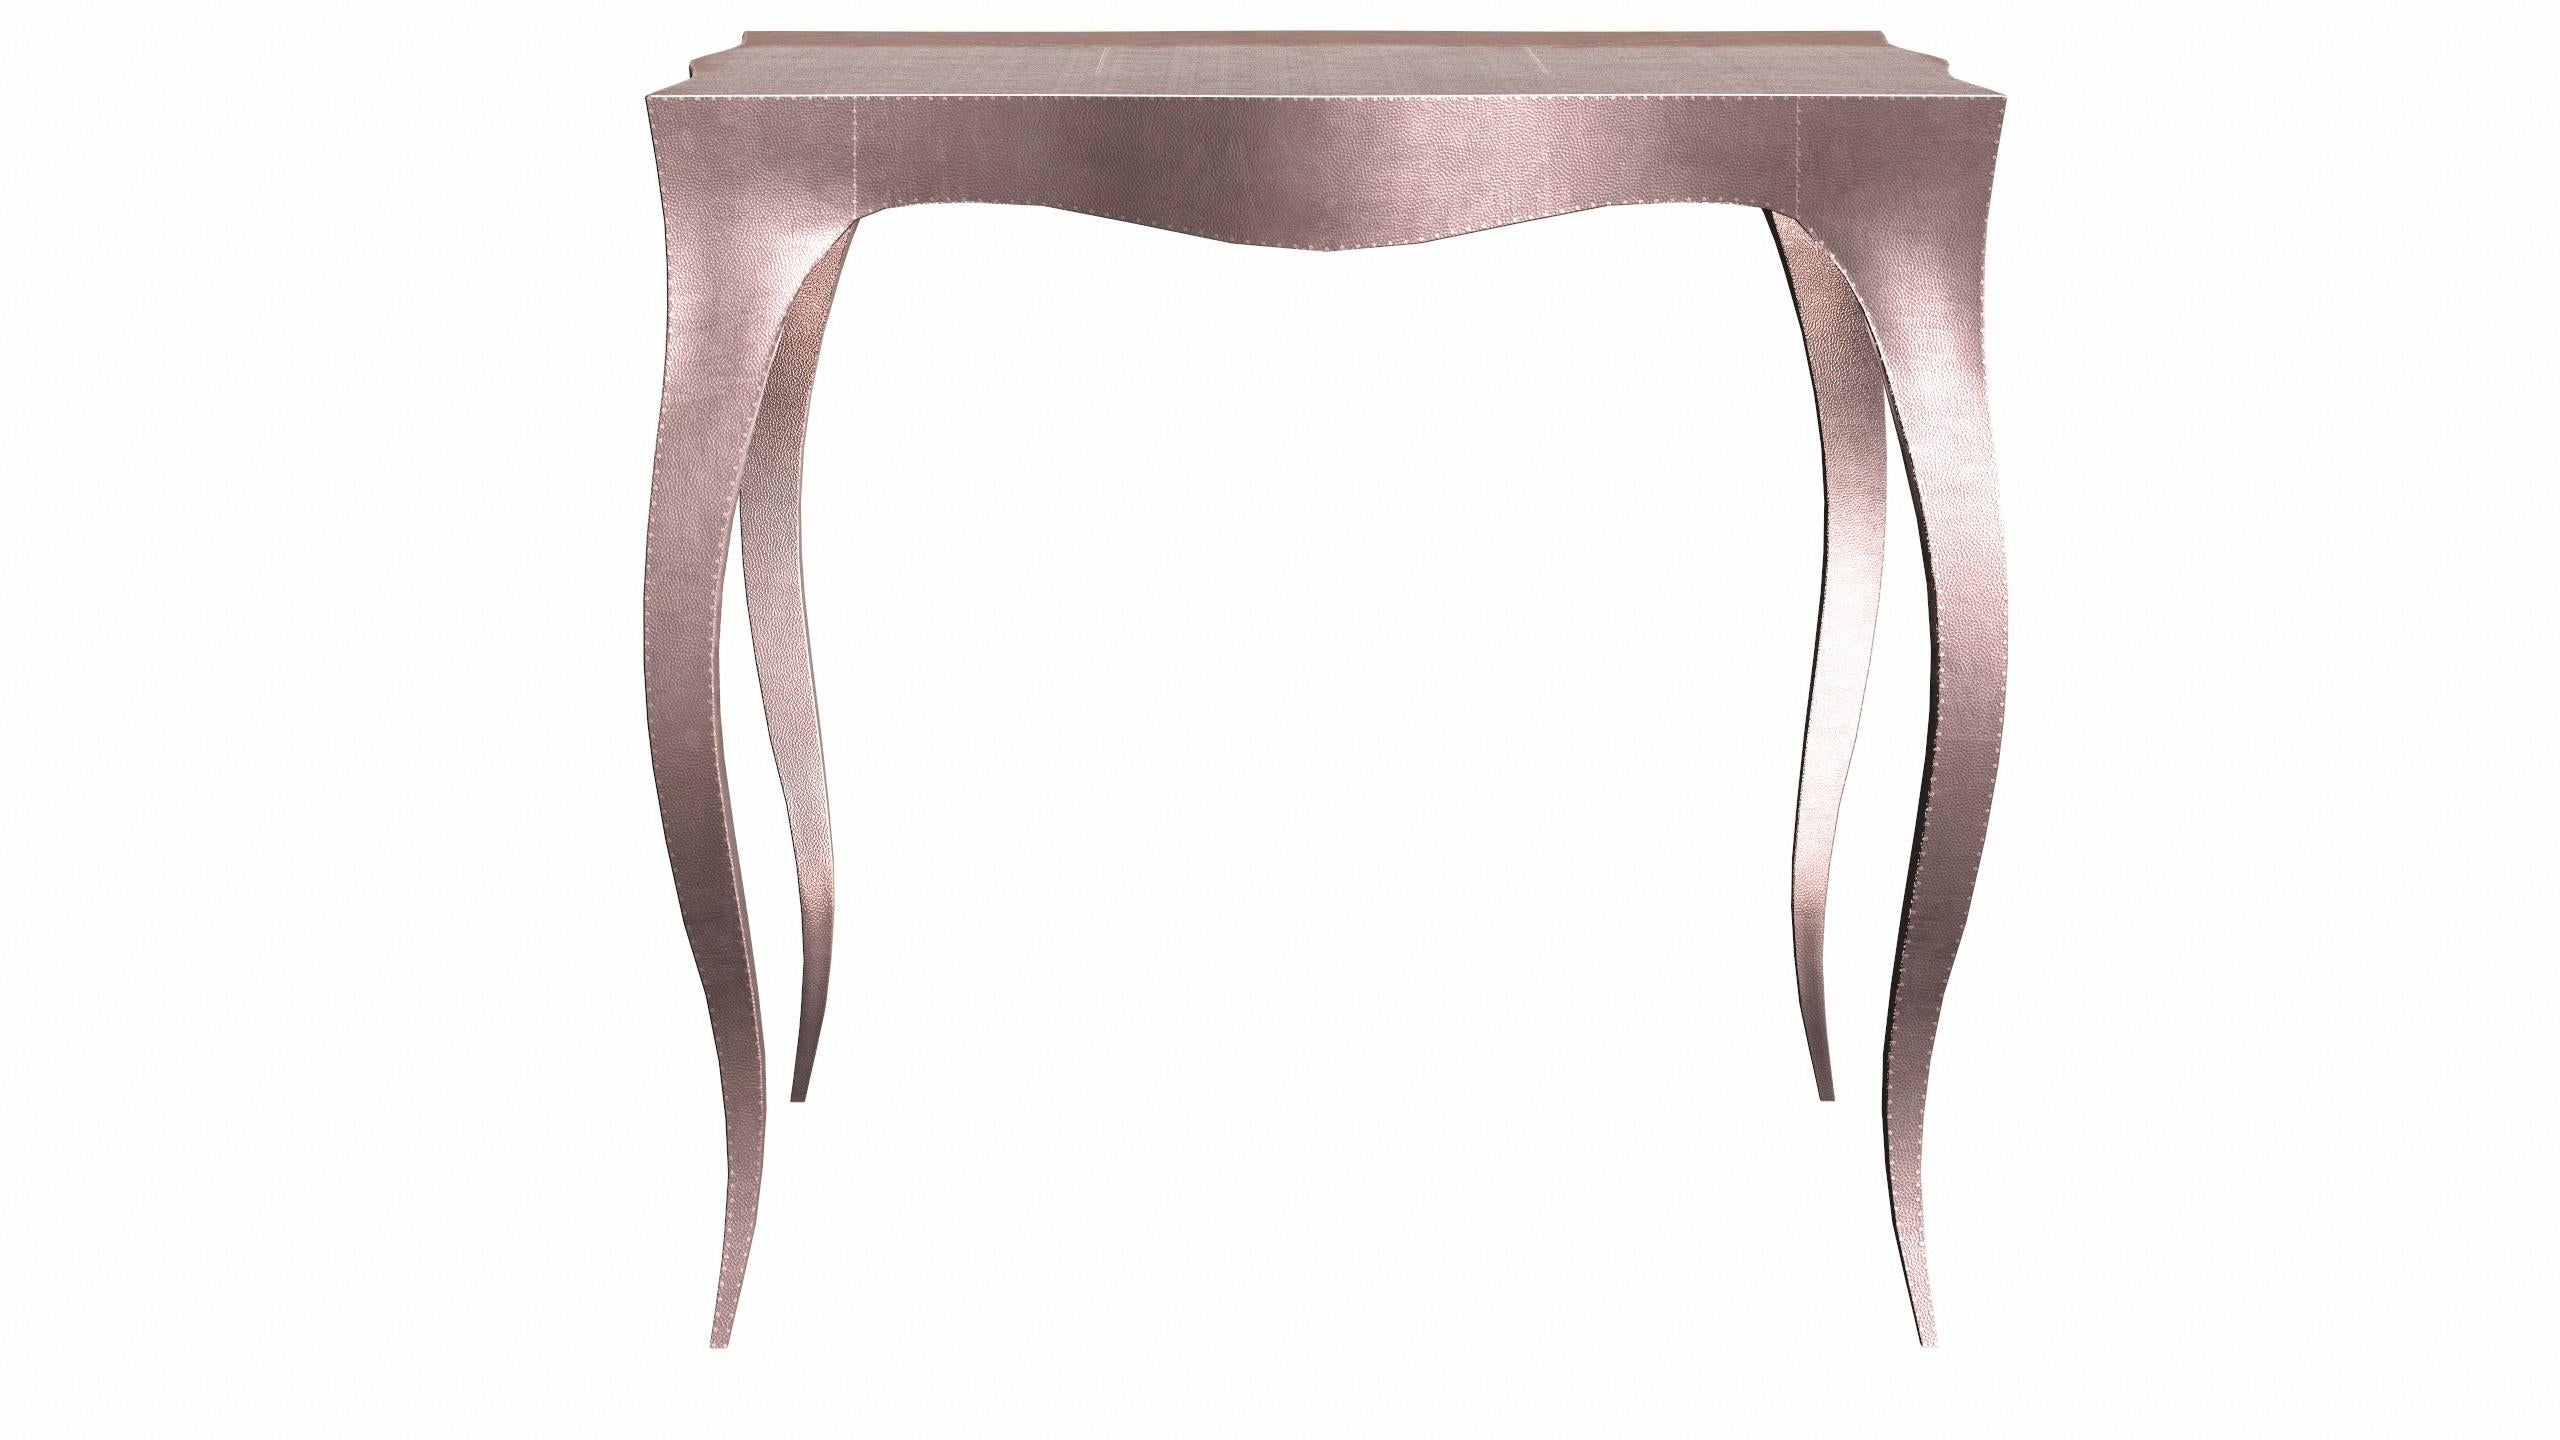 American Louise Art Deco Coffee and Cocktail Tables Mid. Hammered Copper by Paul Mathieu For Sale